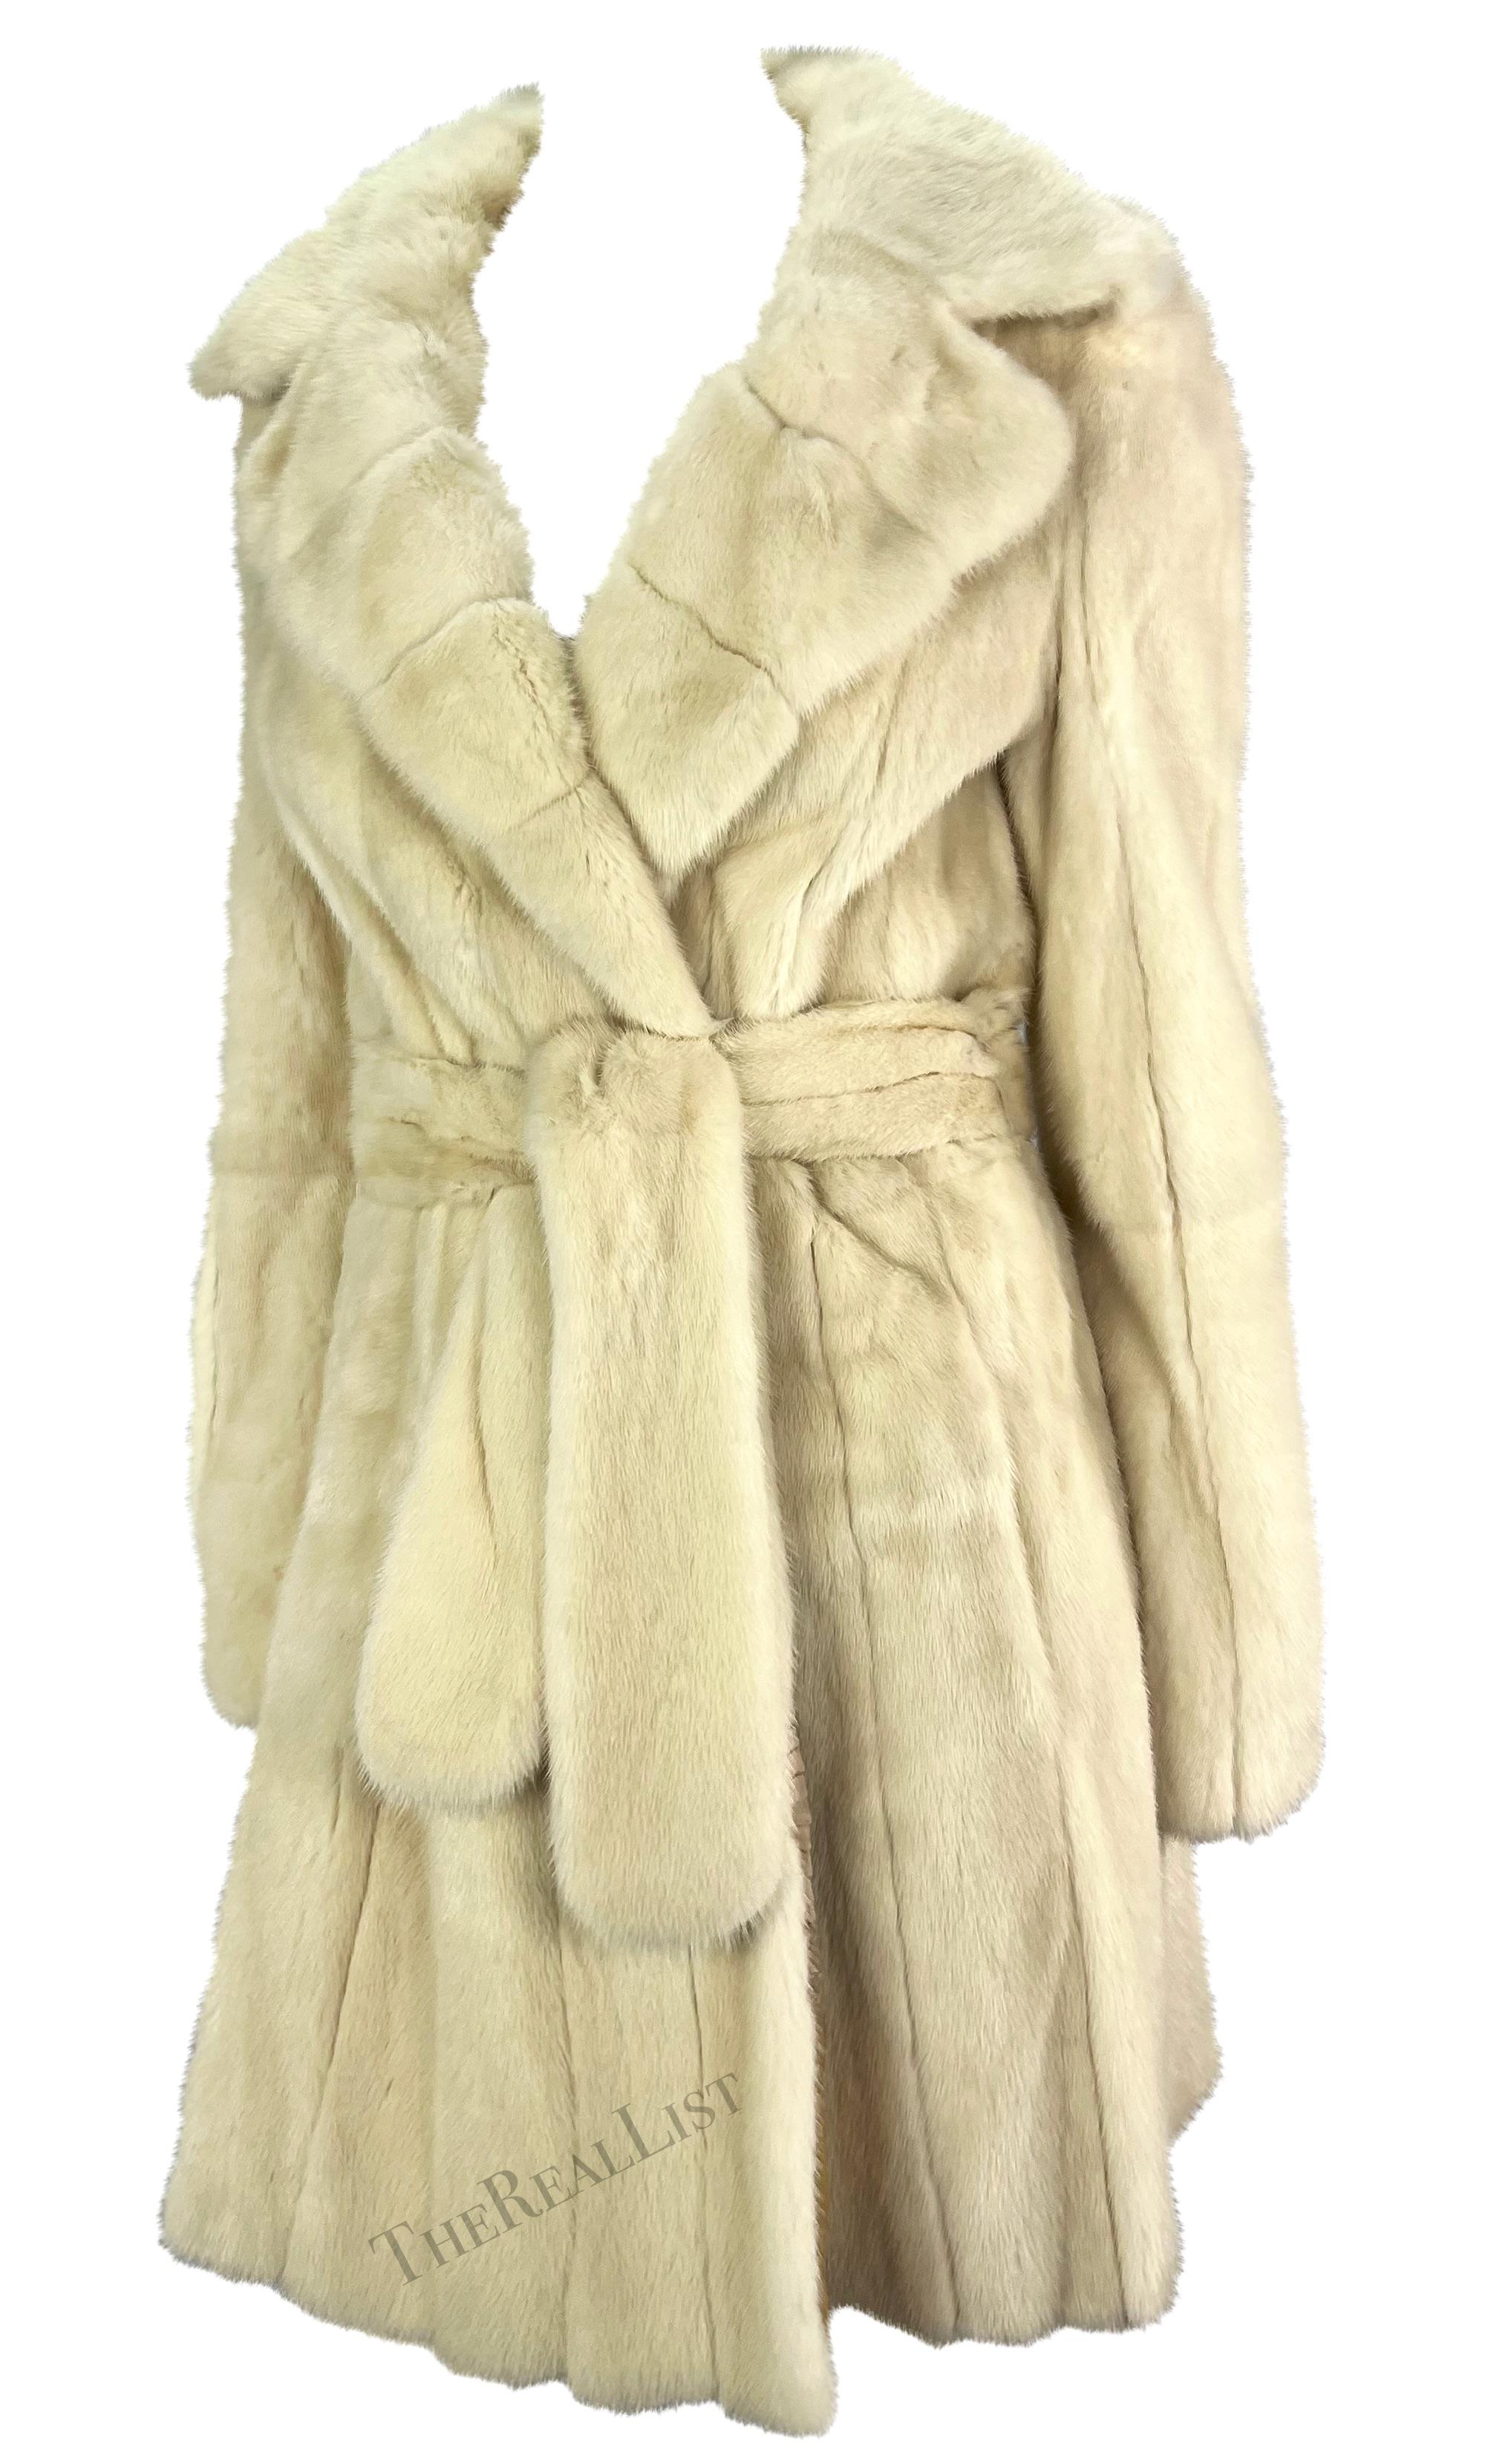 Presenting a stunning creme Roberto Cavalli mink coat. From the 2000s, this luxurious coat is constructed entirely of ultra-soft mink fur. This chic wrap coat features a large fold-over collar and is made complete with the matching tie belt.